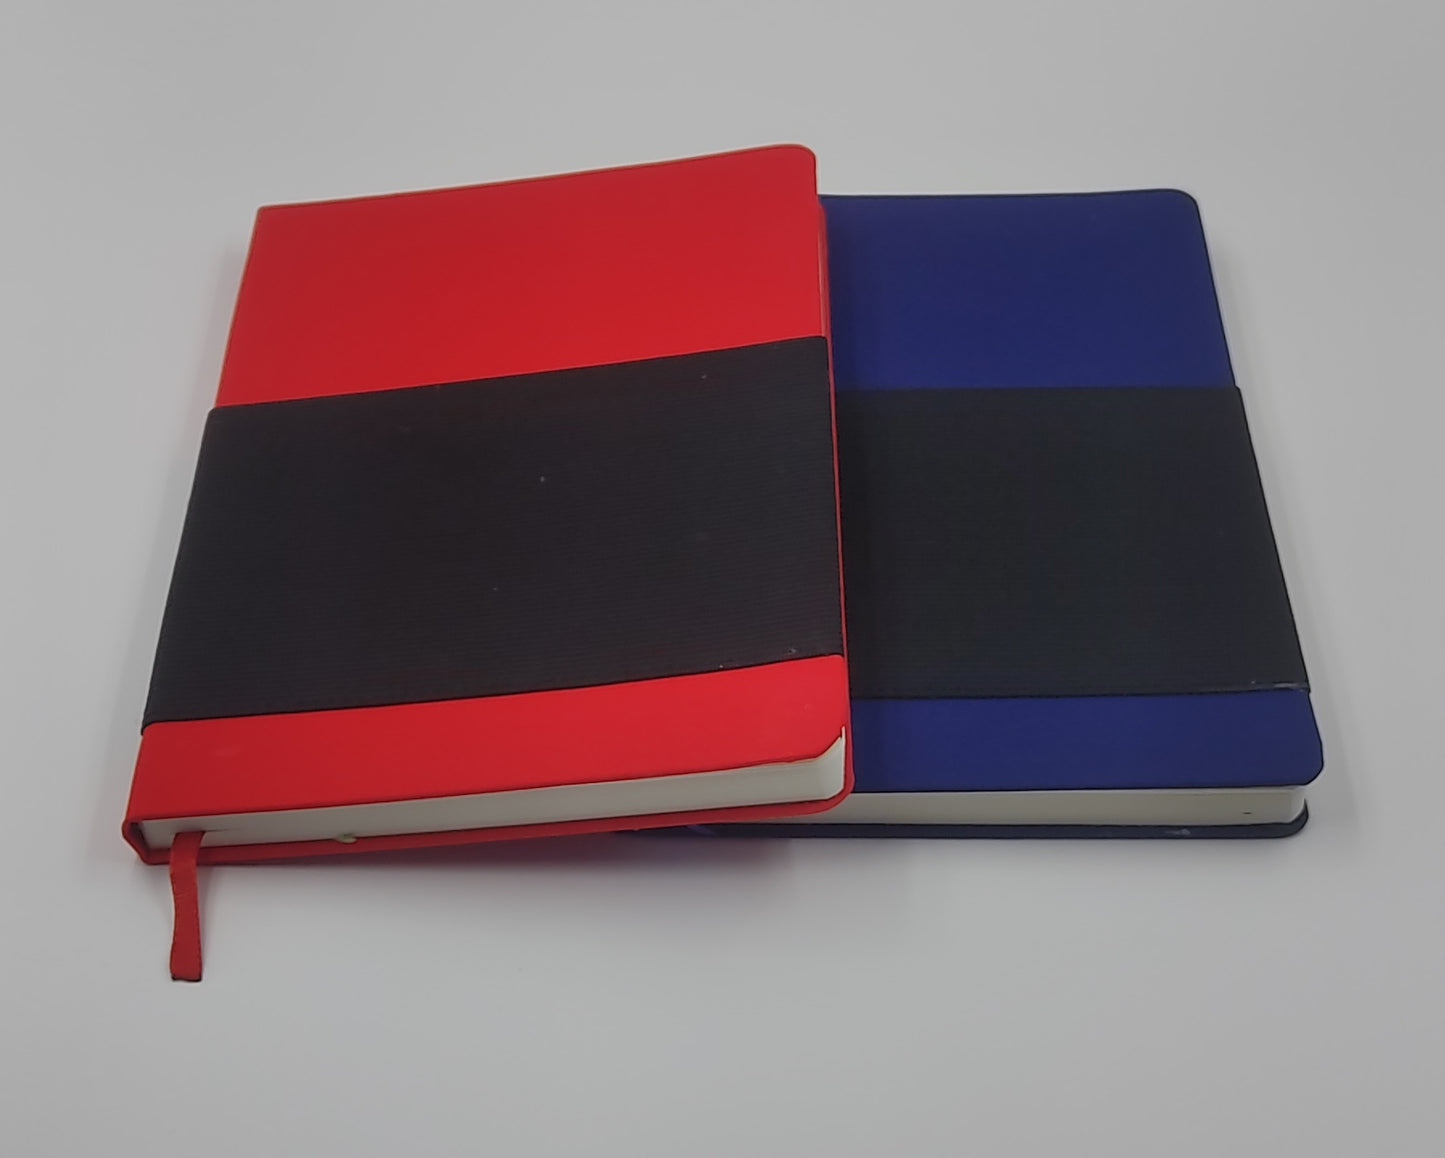 Pocket notebook with Fabric cover | Elastic full size pocket | A5 size | Hard bound cover | With memorandum & Bookmark ribbon| 80 gsm sheets | 160 undated pages